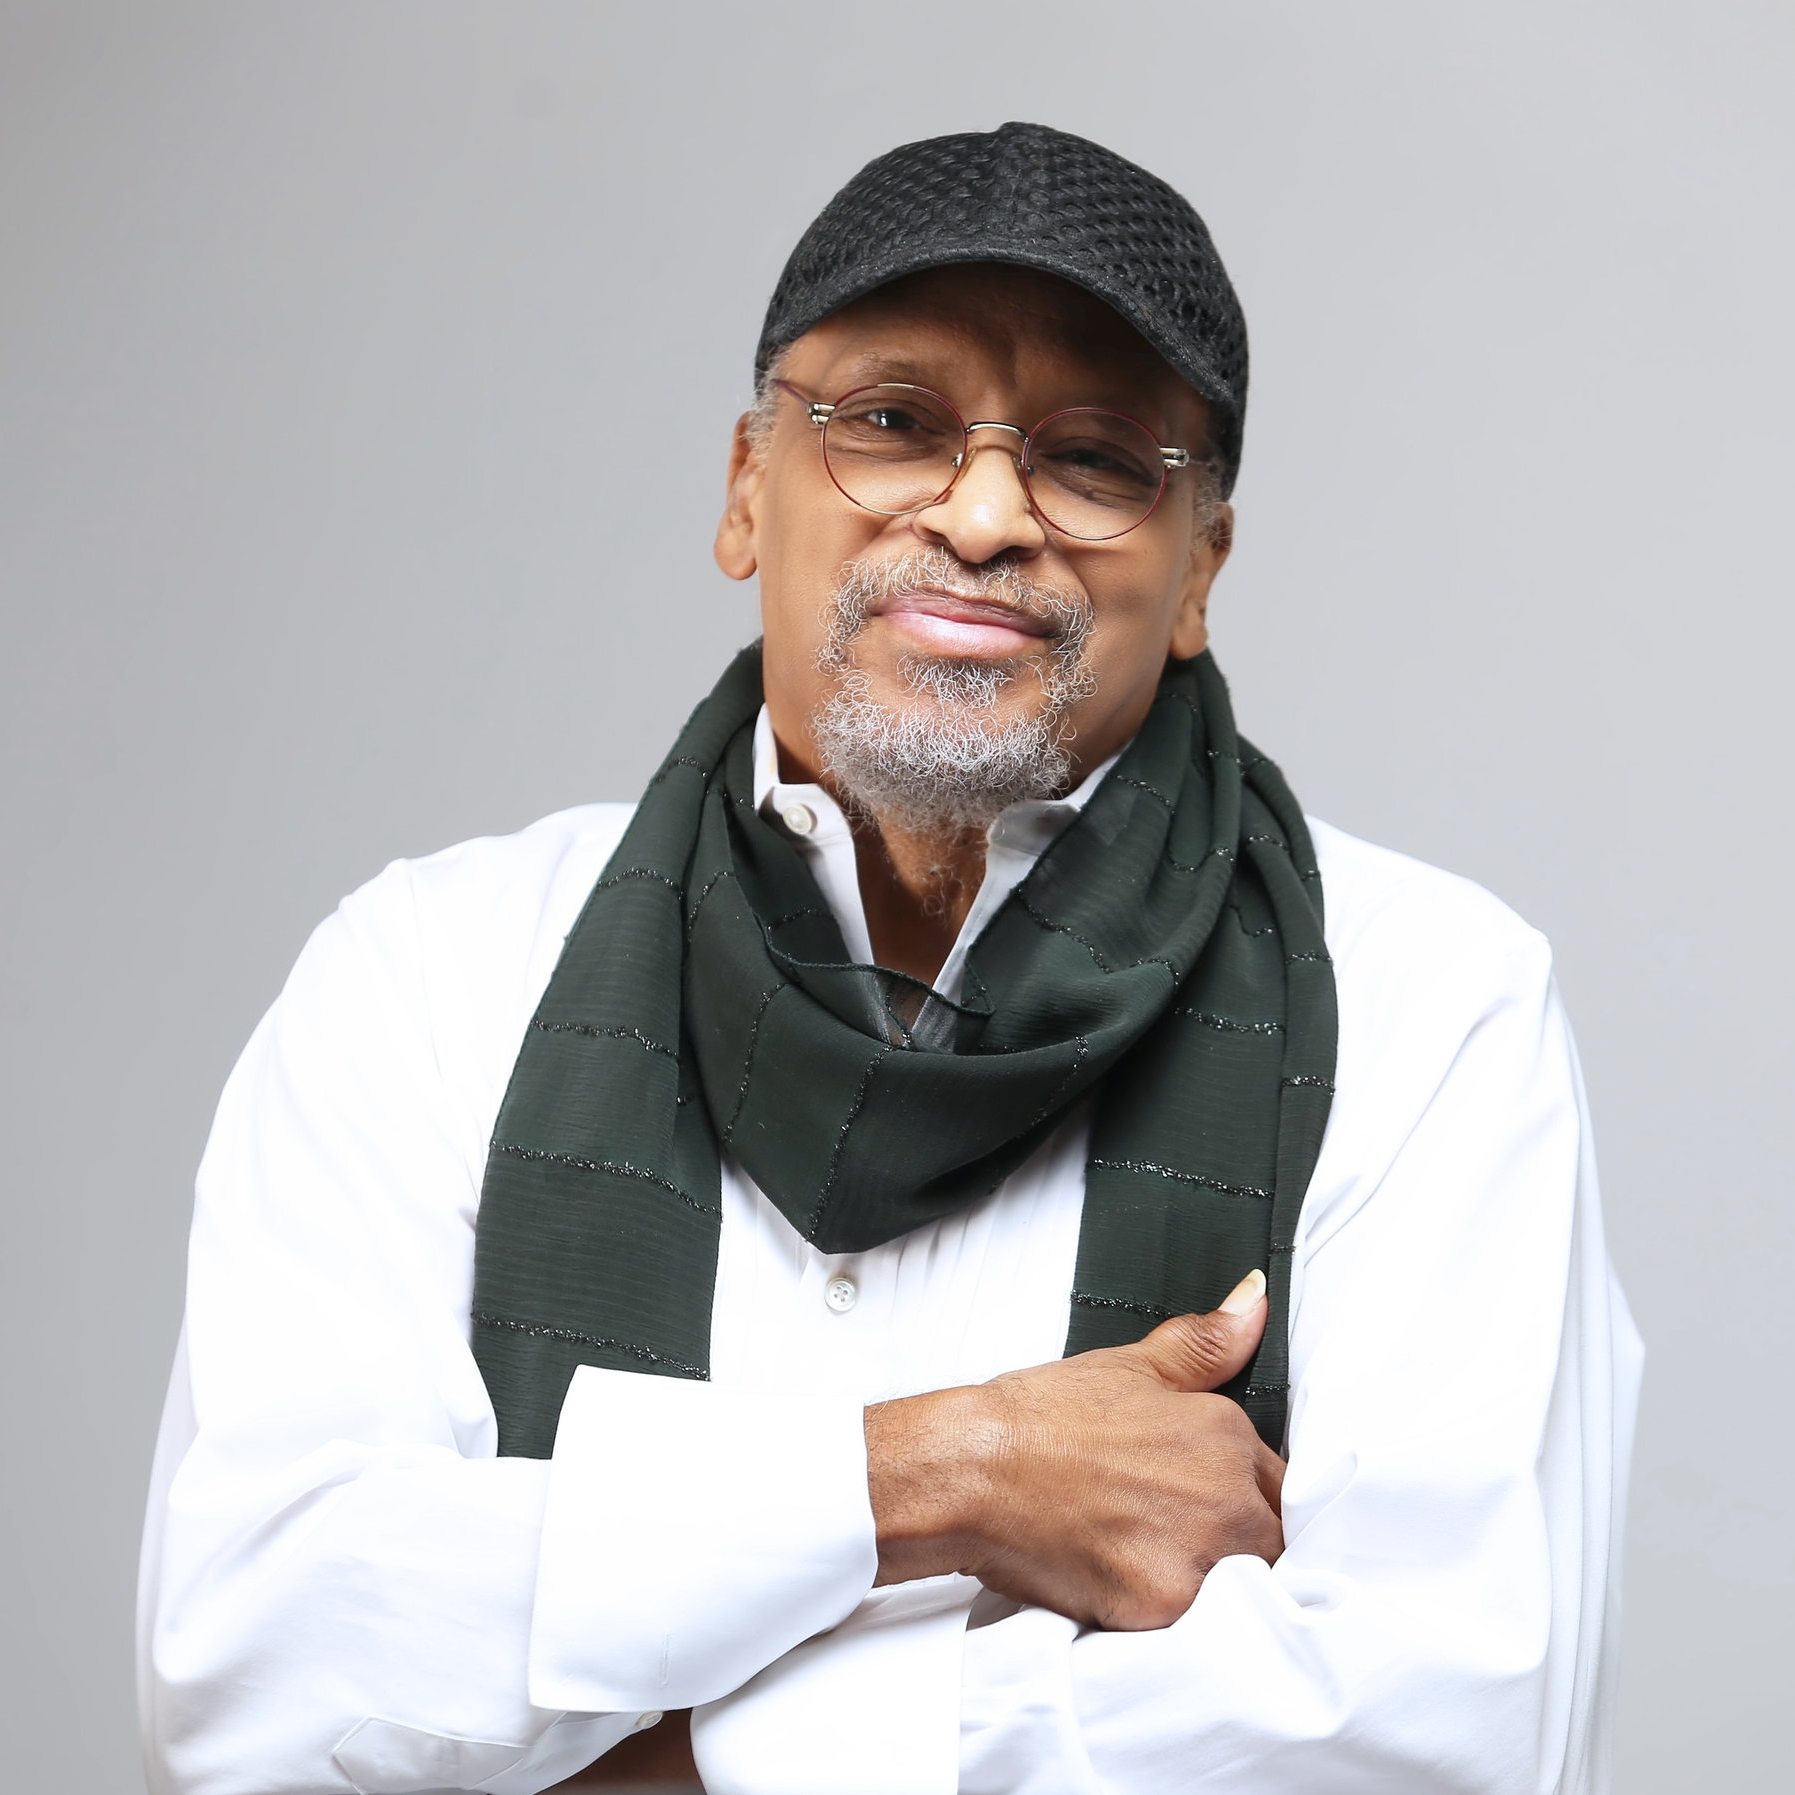 James Mtume: Our Common Ground in Music